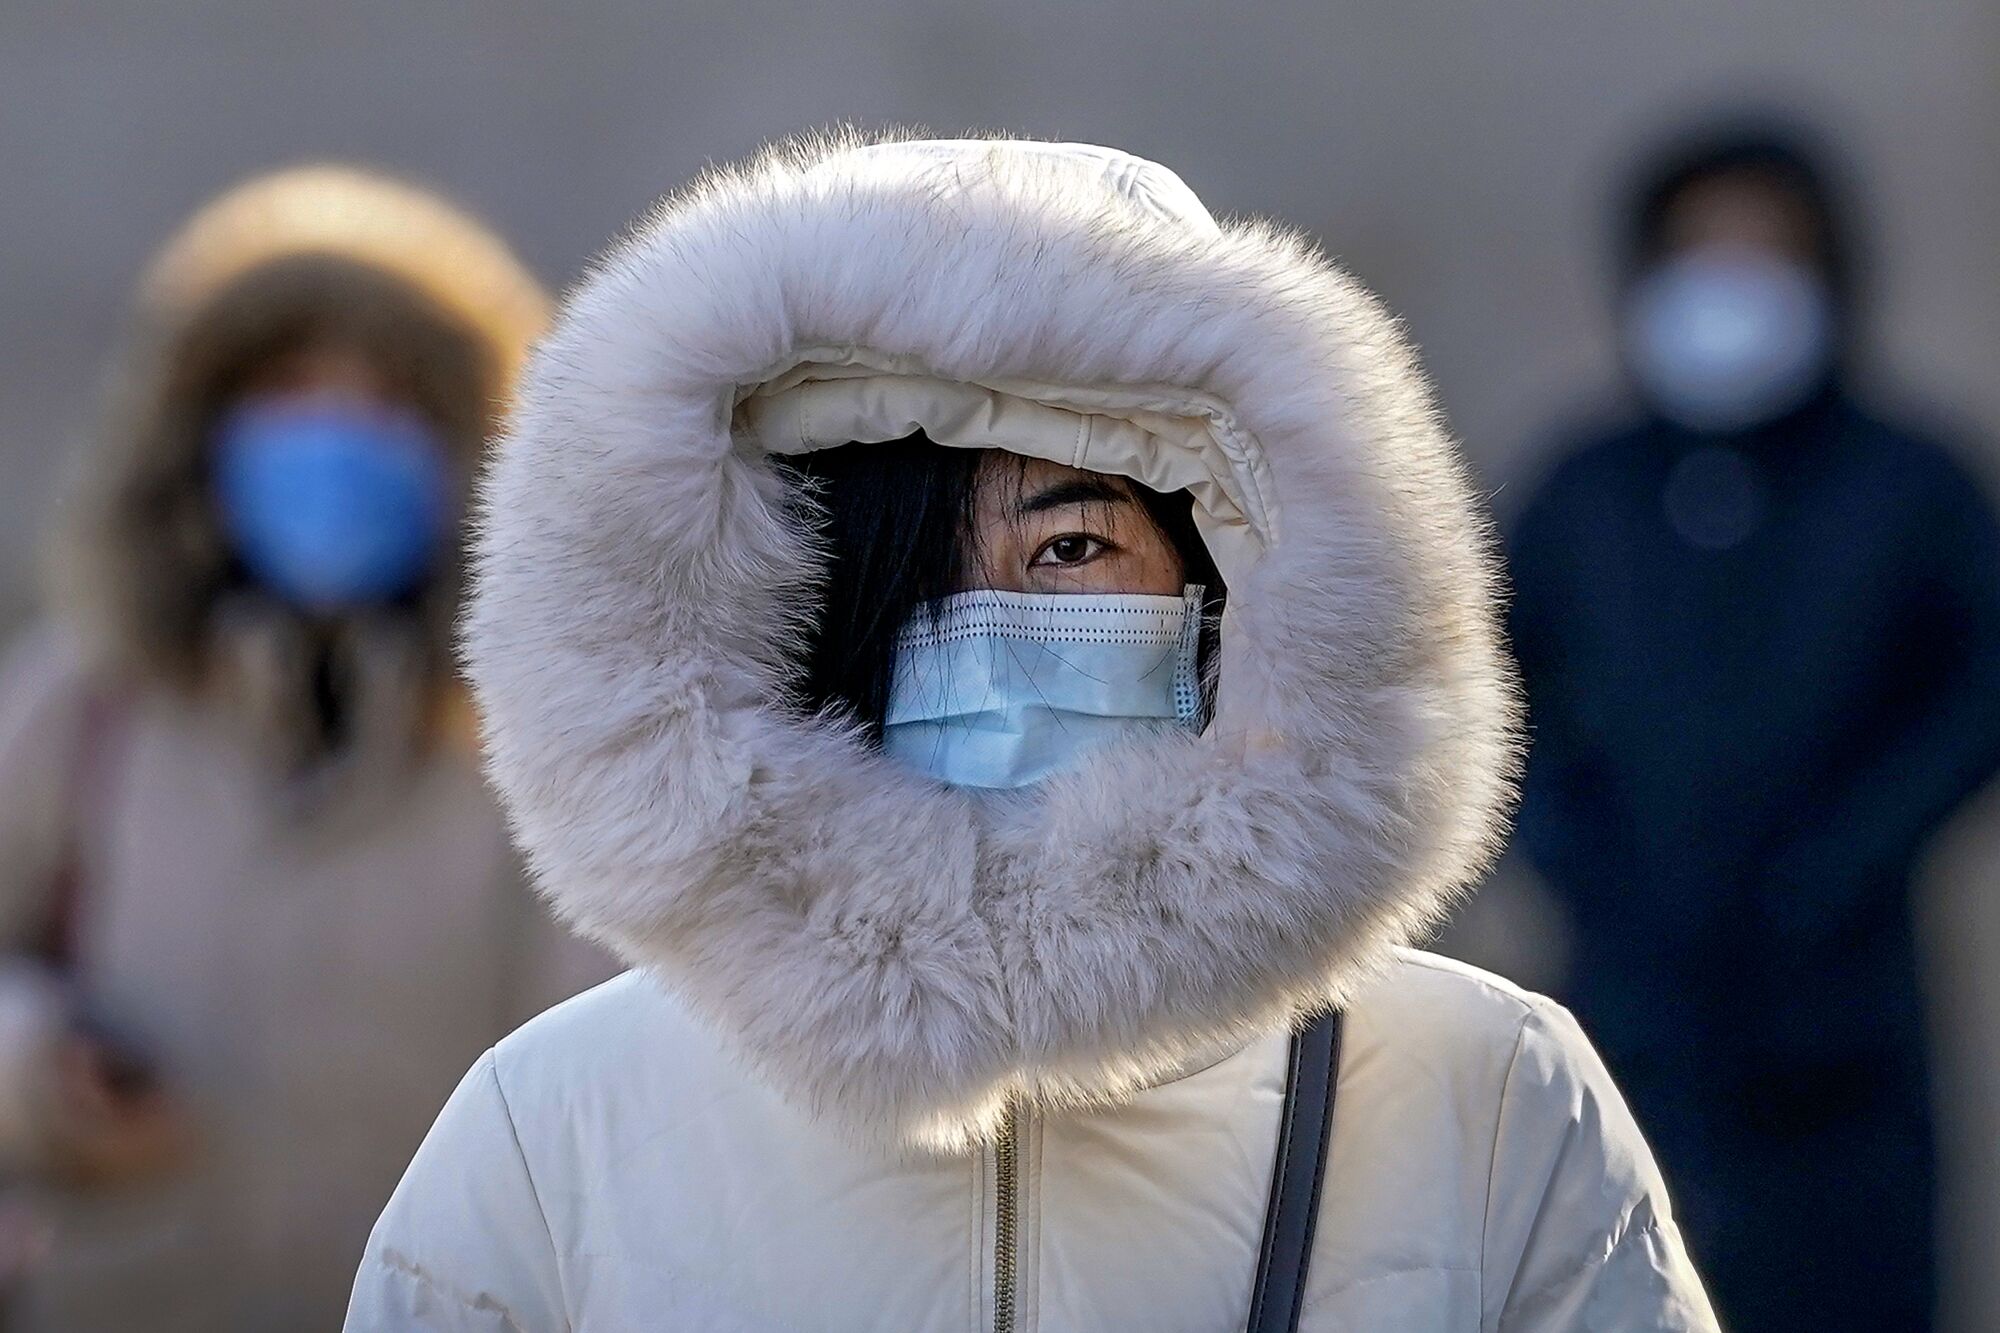 A pedestrian in Beijing relies on a mask and a hood to ward off coronavirus contagion and the chill.